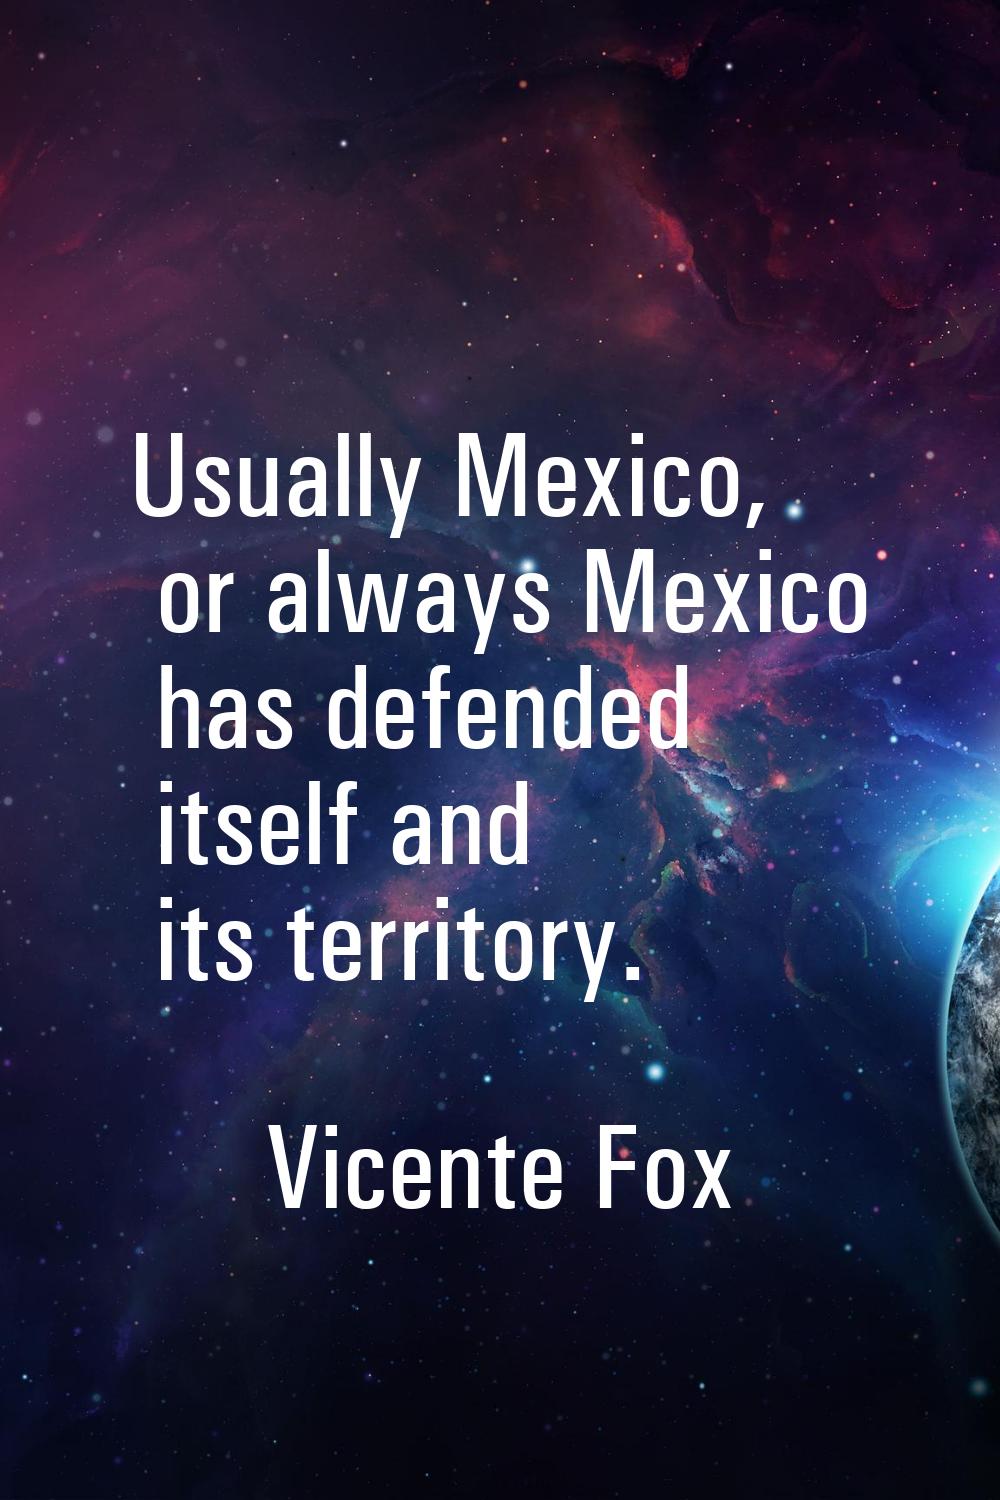 Usually Mexico, or always Mexico has defended itself and its territory.